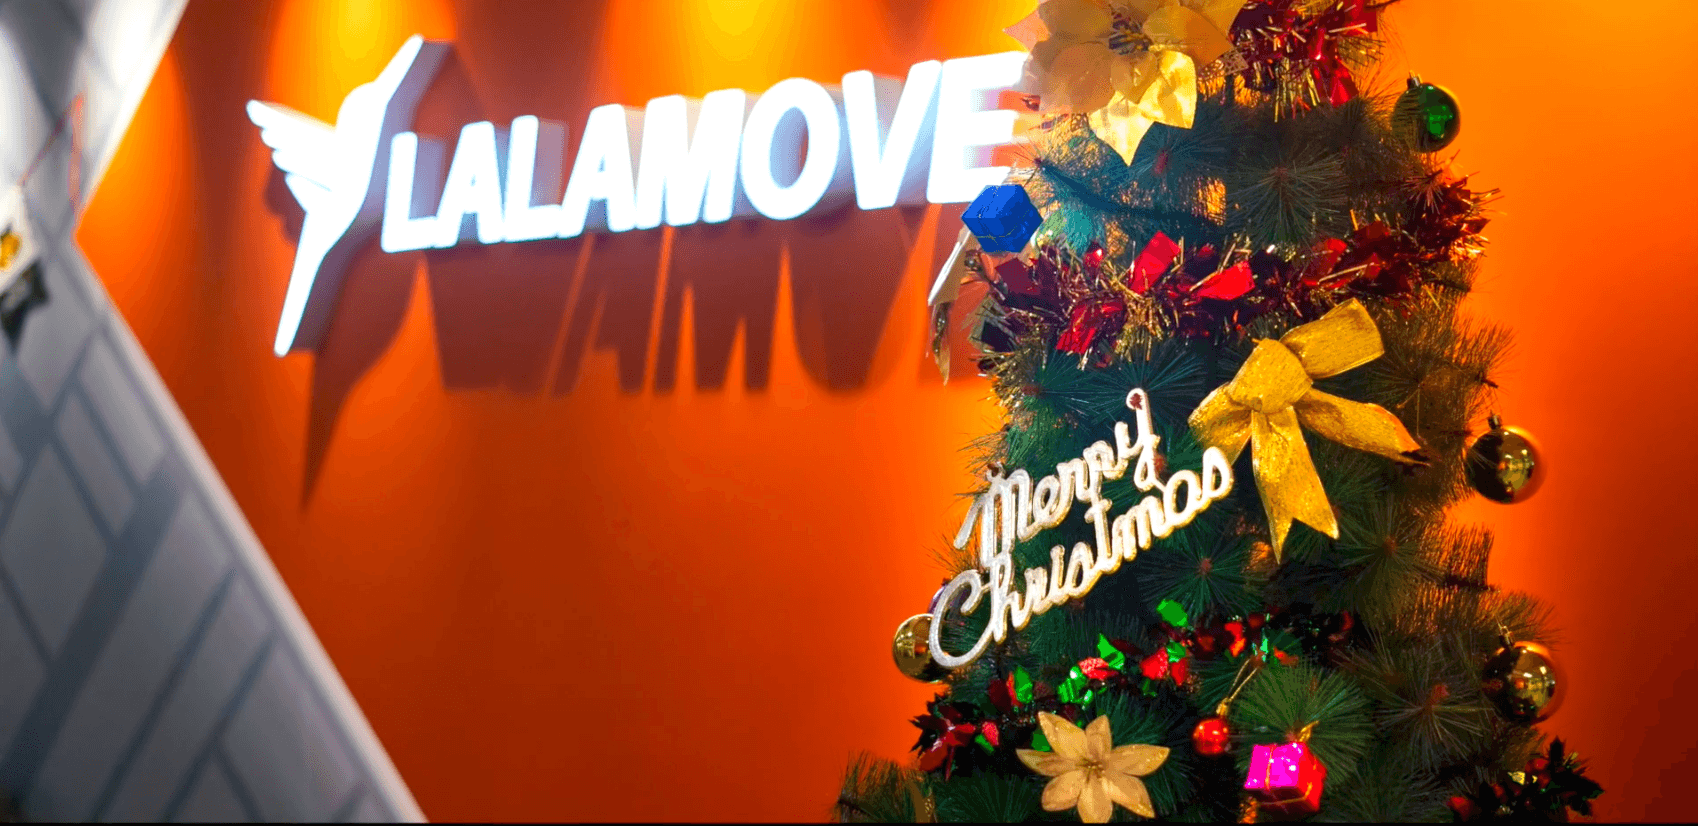 Lalamove asked to explain ‘December fee’ for Christmas deliveries